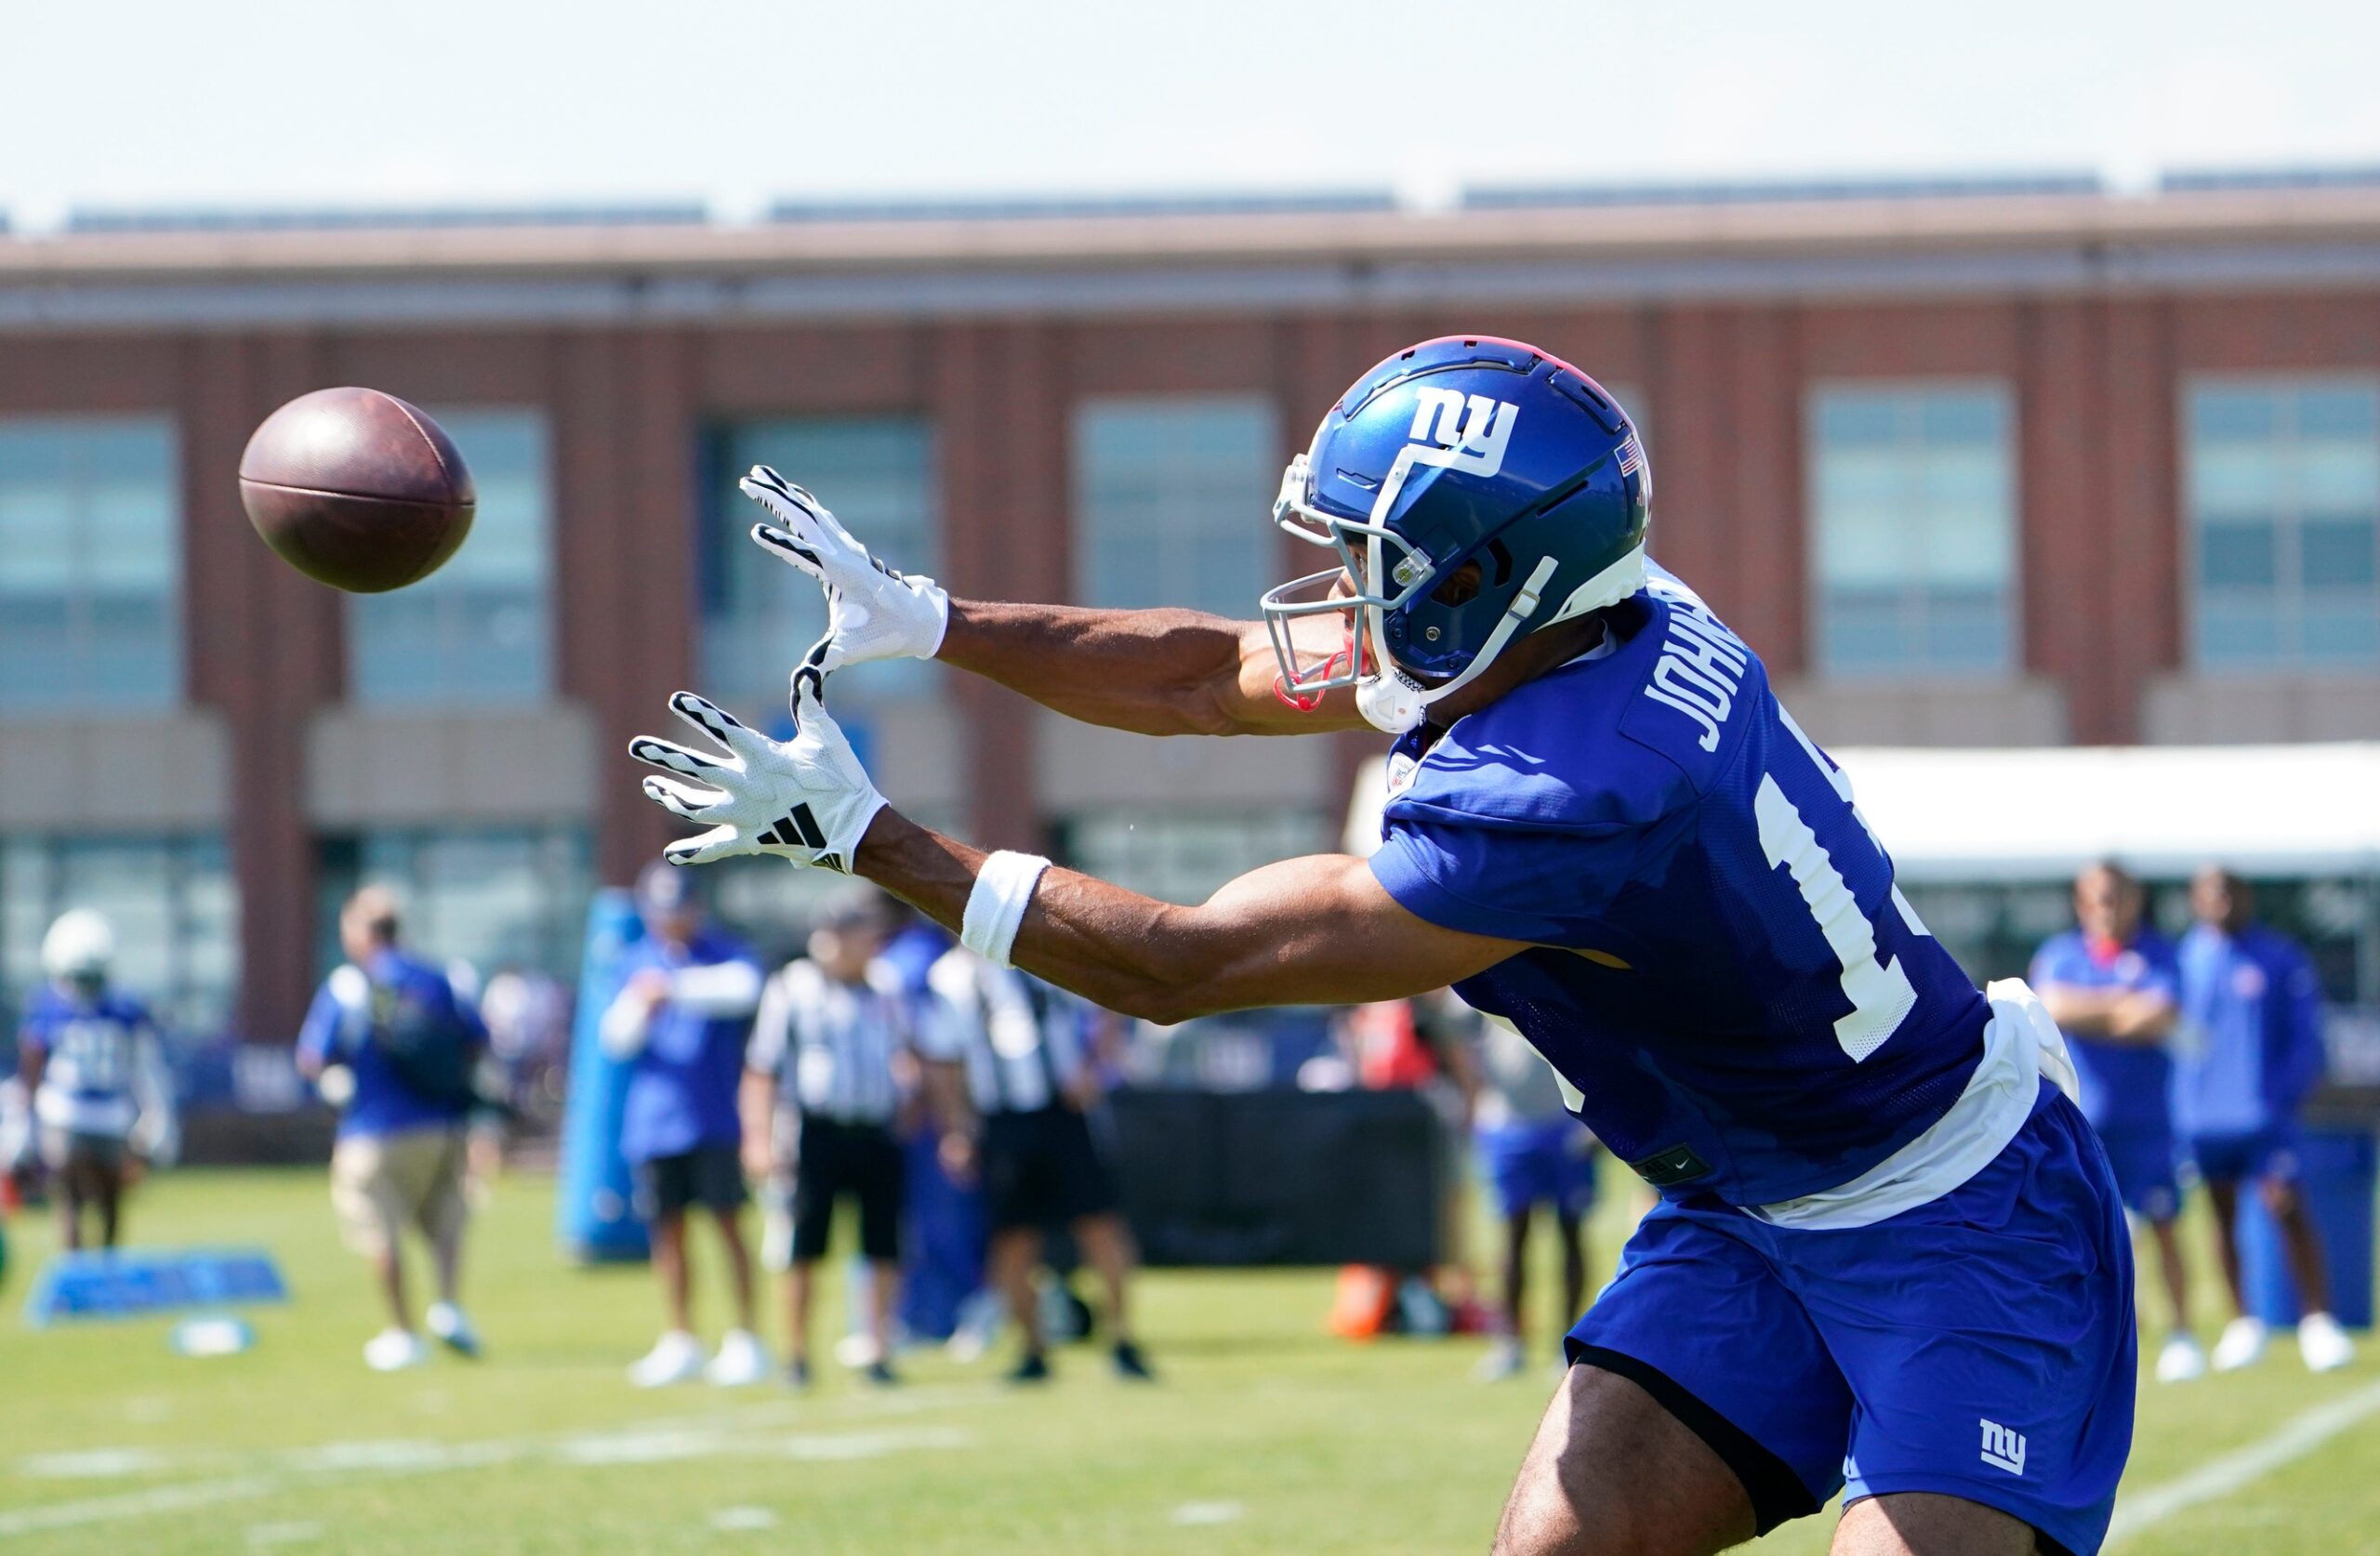 Giants depth chart: Complete 2023 roster for New York, including